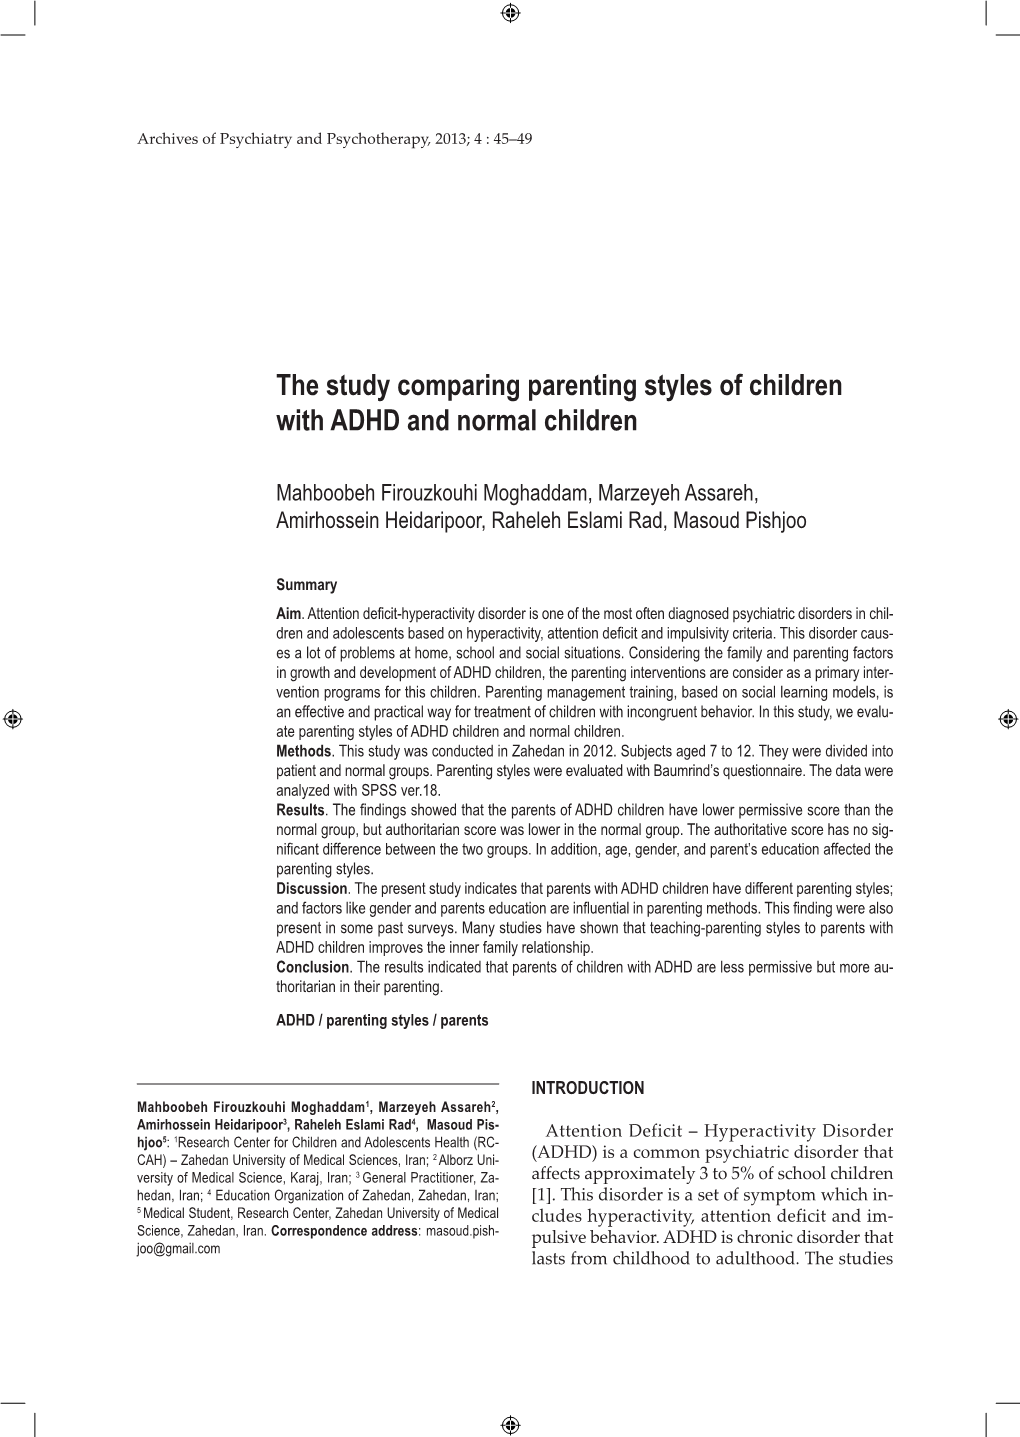 The Study Comparing Parenting Styles of Children with ADHD and Normal Children